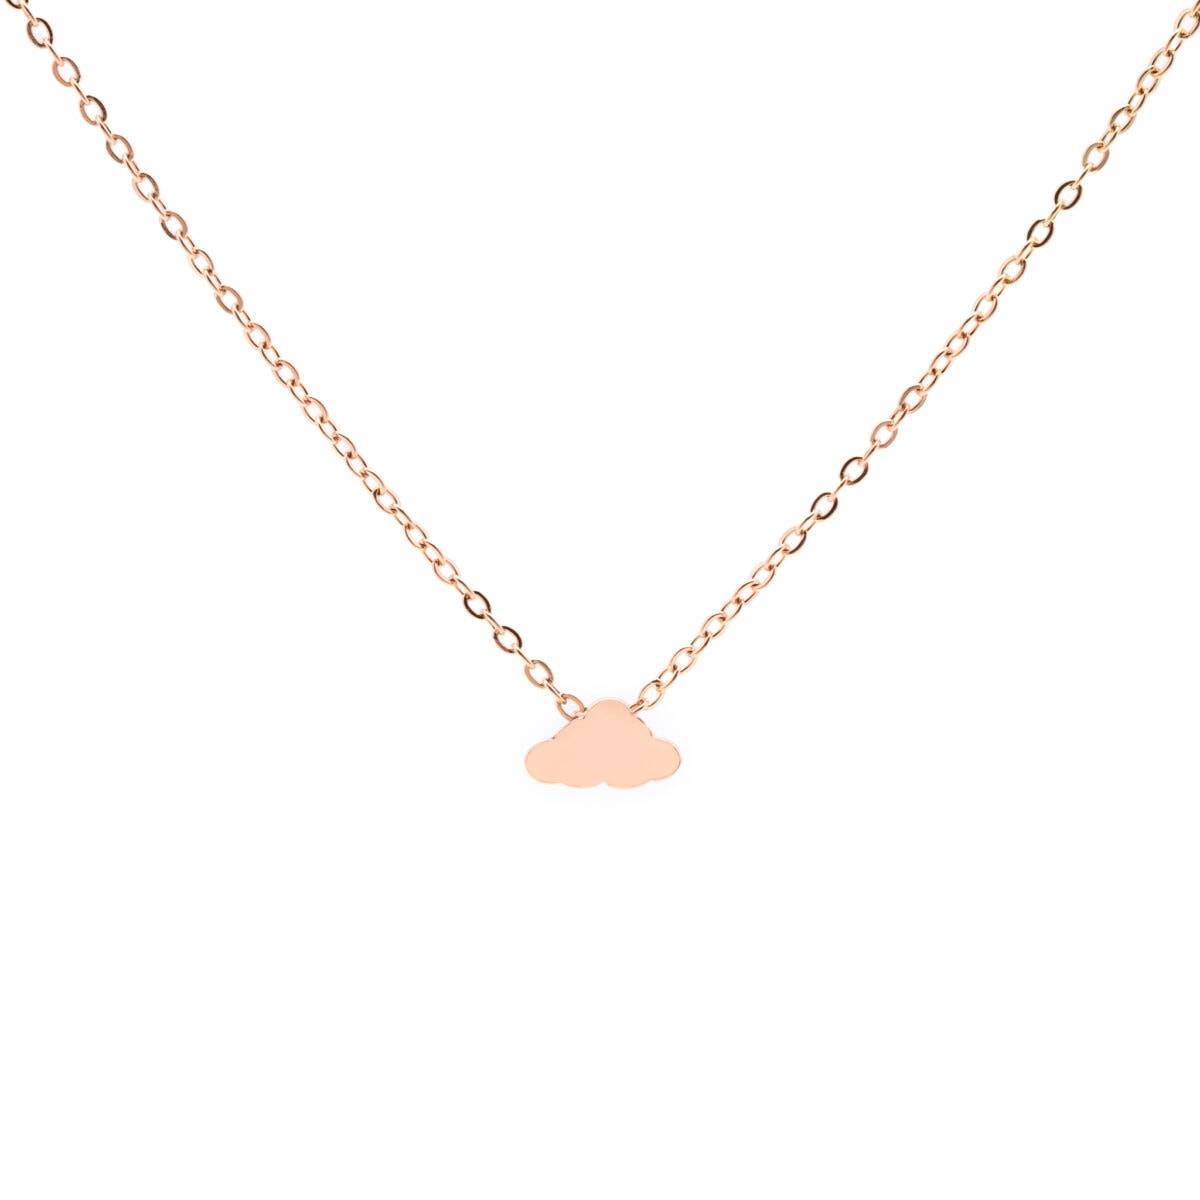 https://m.clubbella.co/product/volare-cloud-rose-gold-charm-necklace/ VOlare Cloud Rose Gold Charm (3)